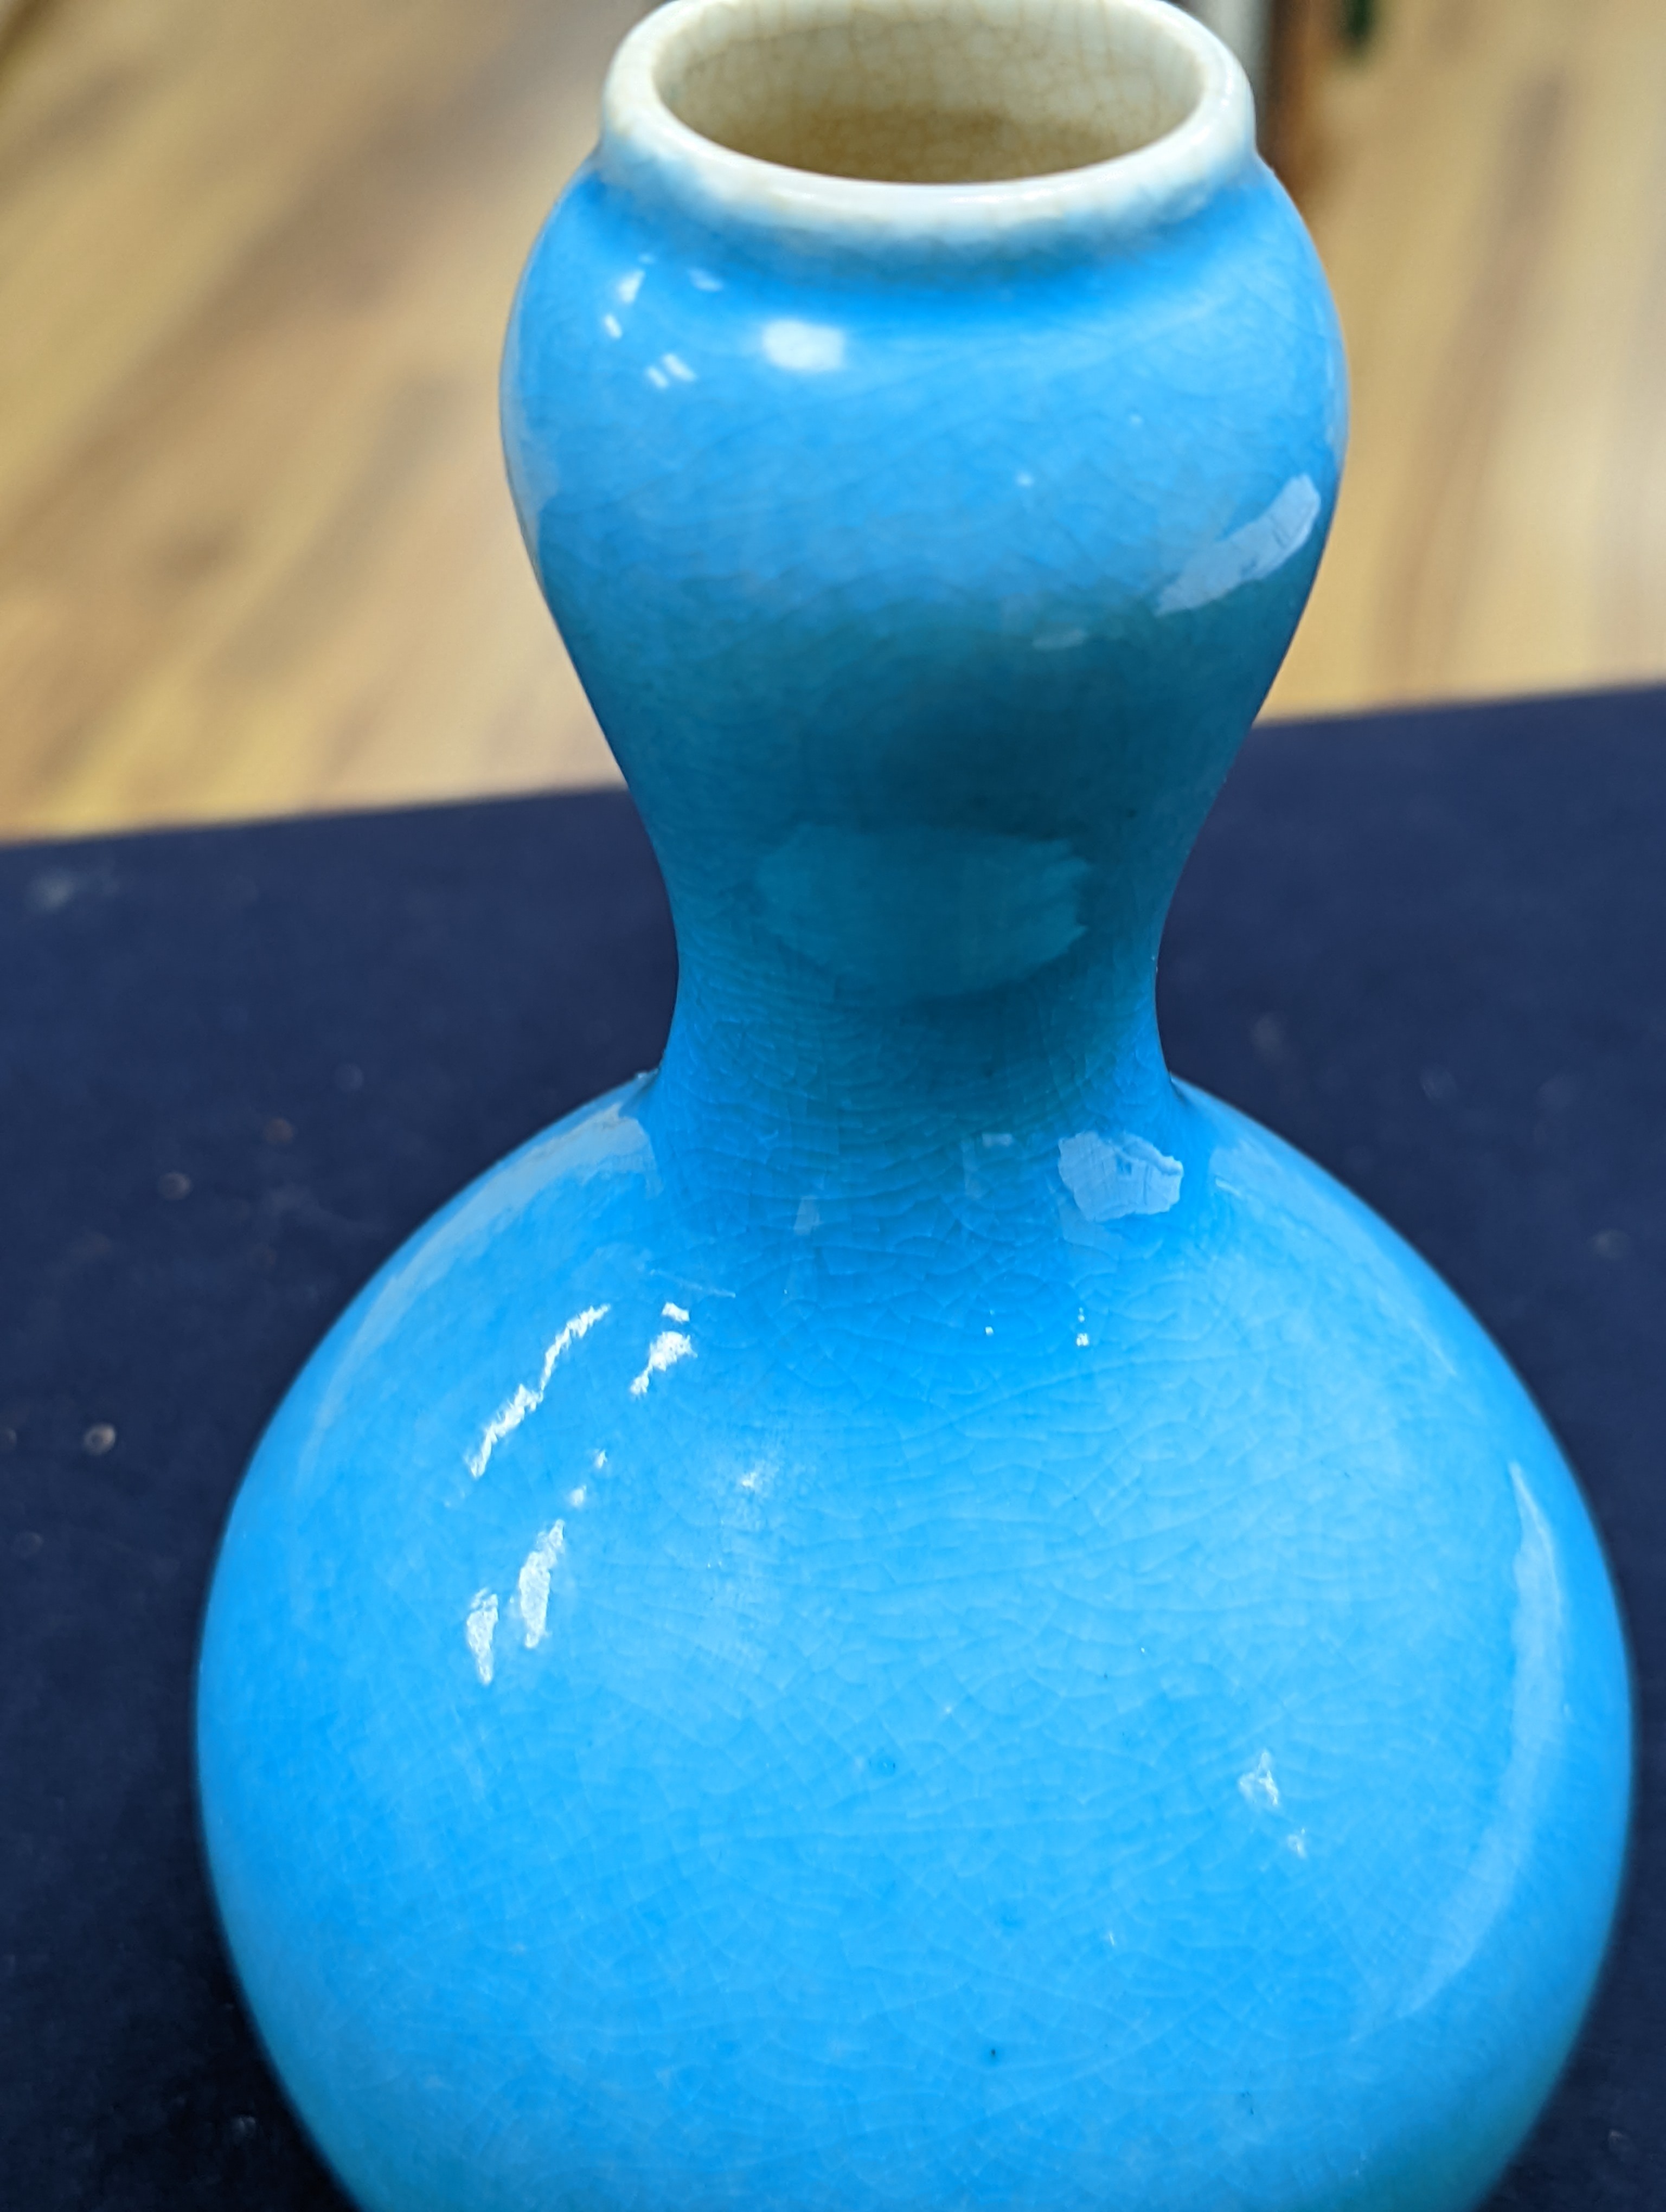 A Chinese turquoise crackle glazed double gourd vase 19cm